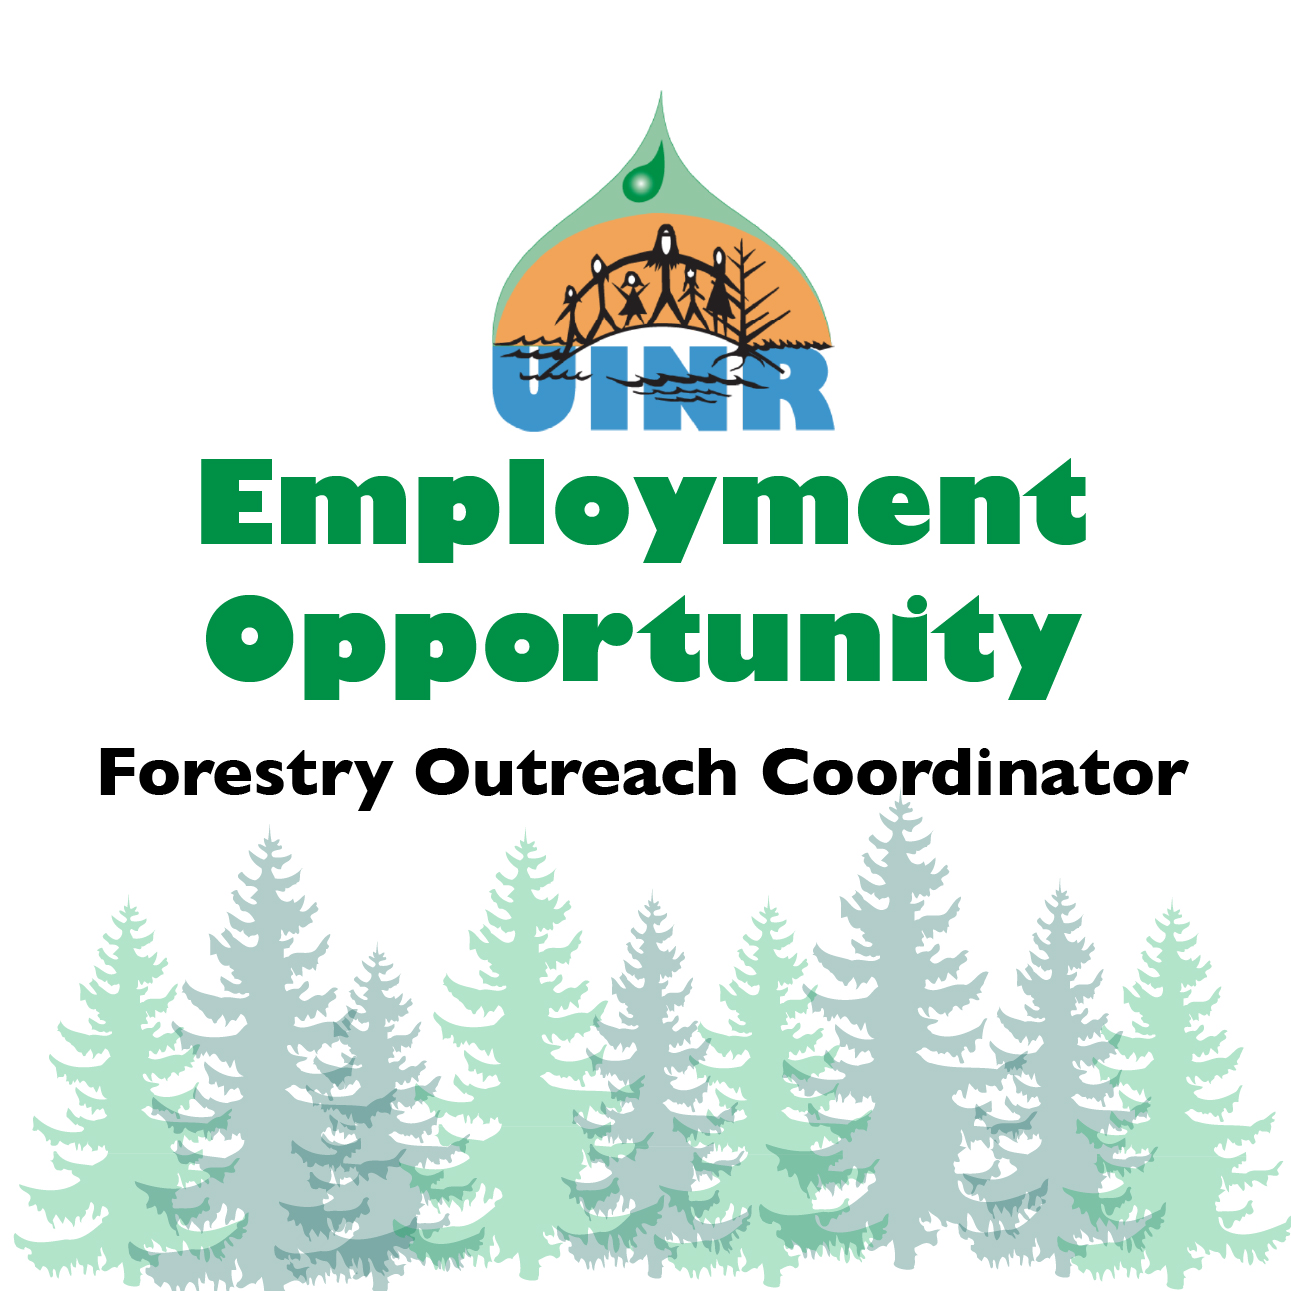 Job Opportunity: Forestry Outreach Coordinator